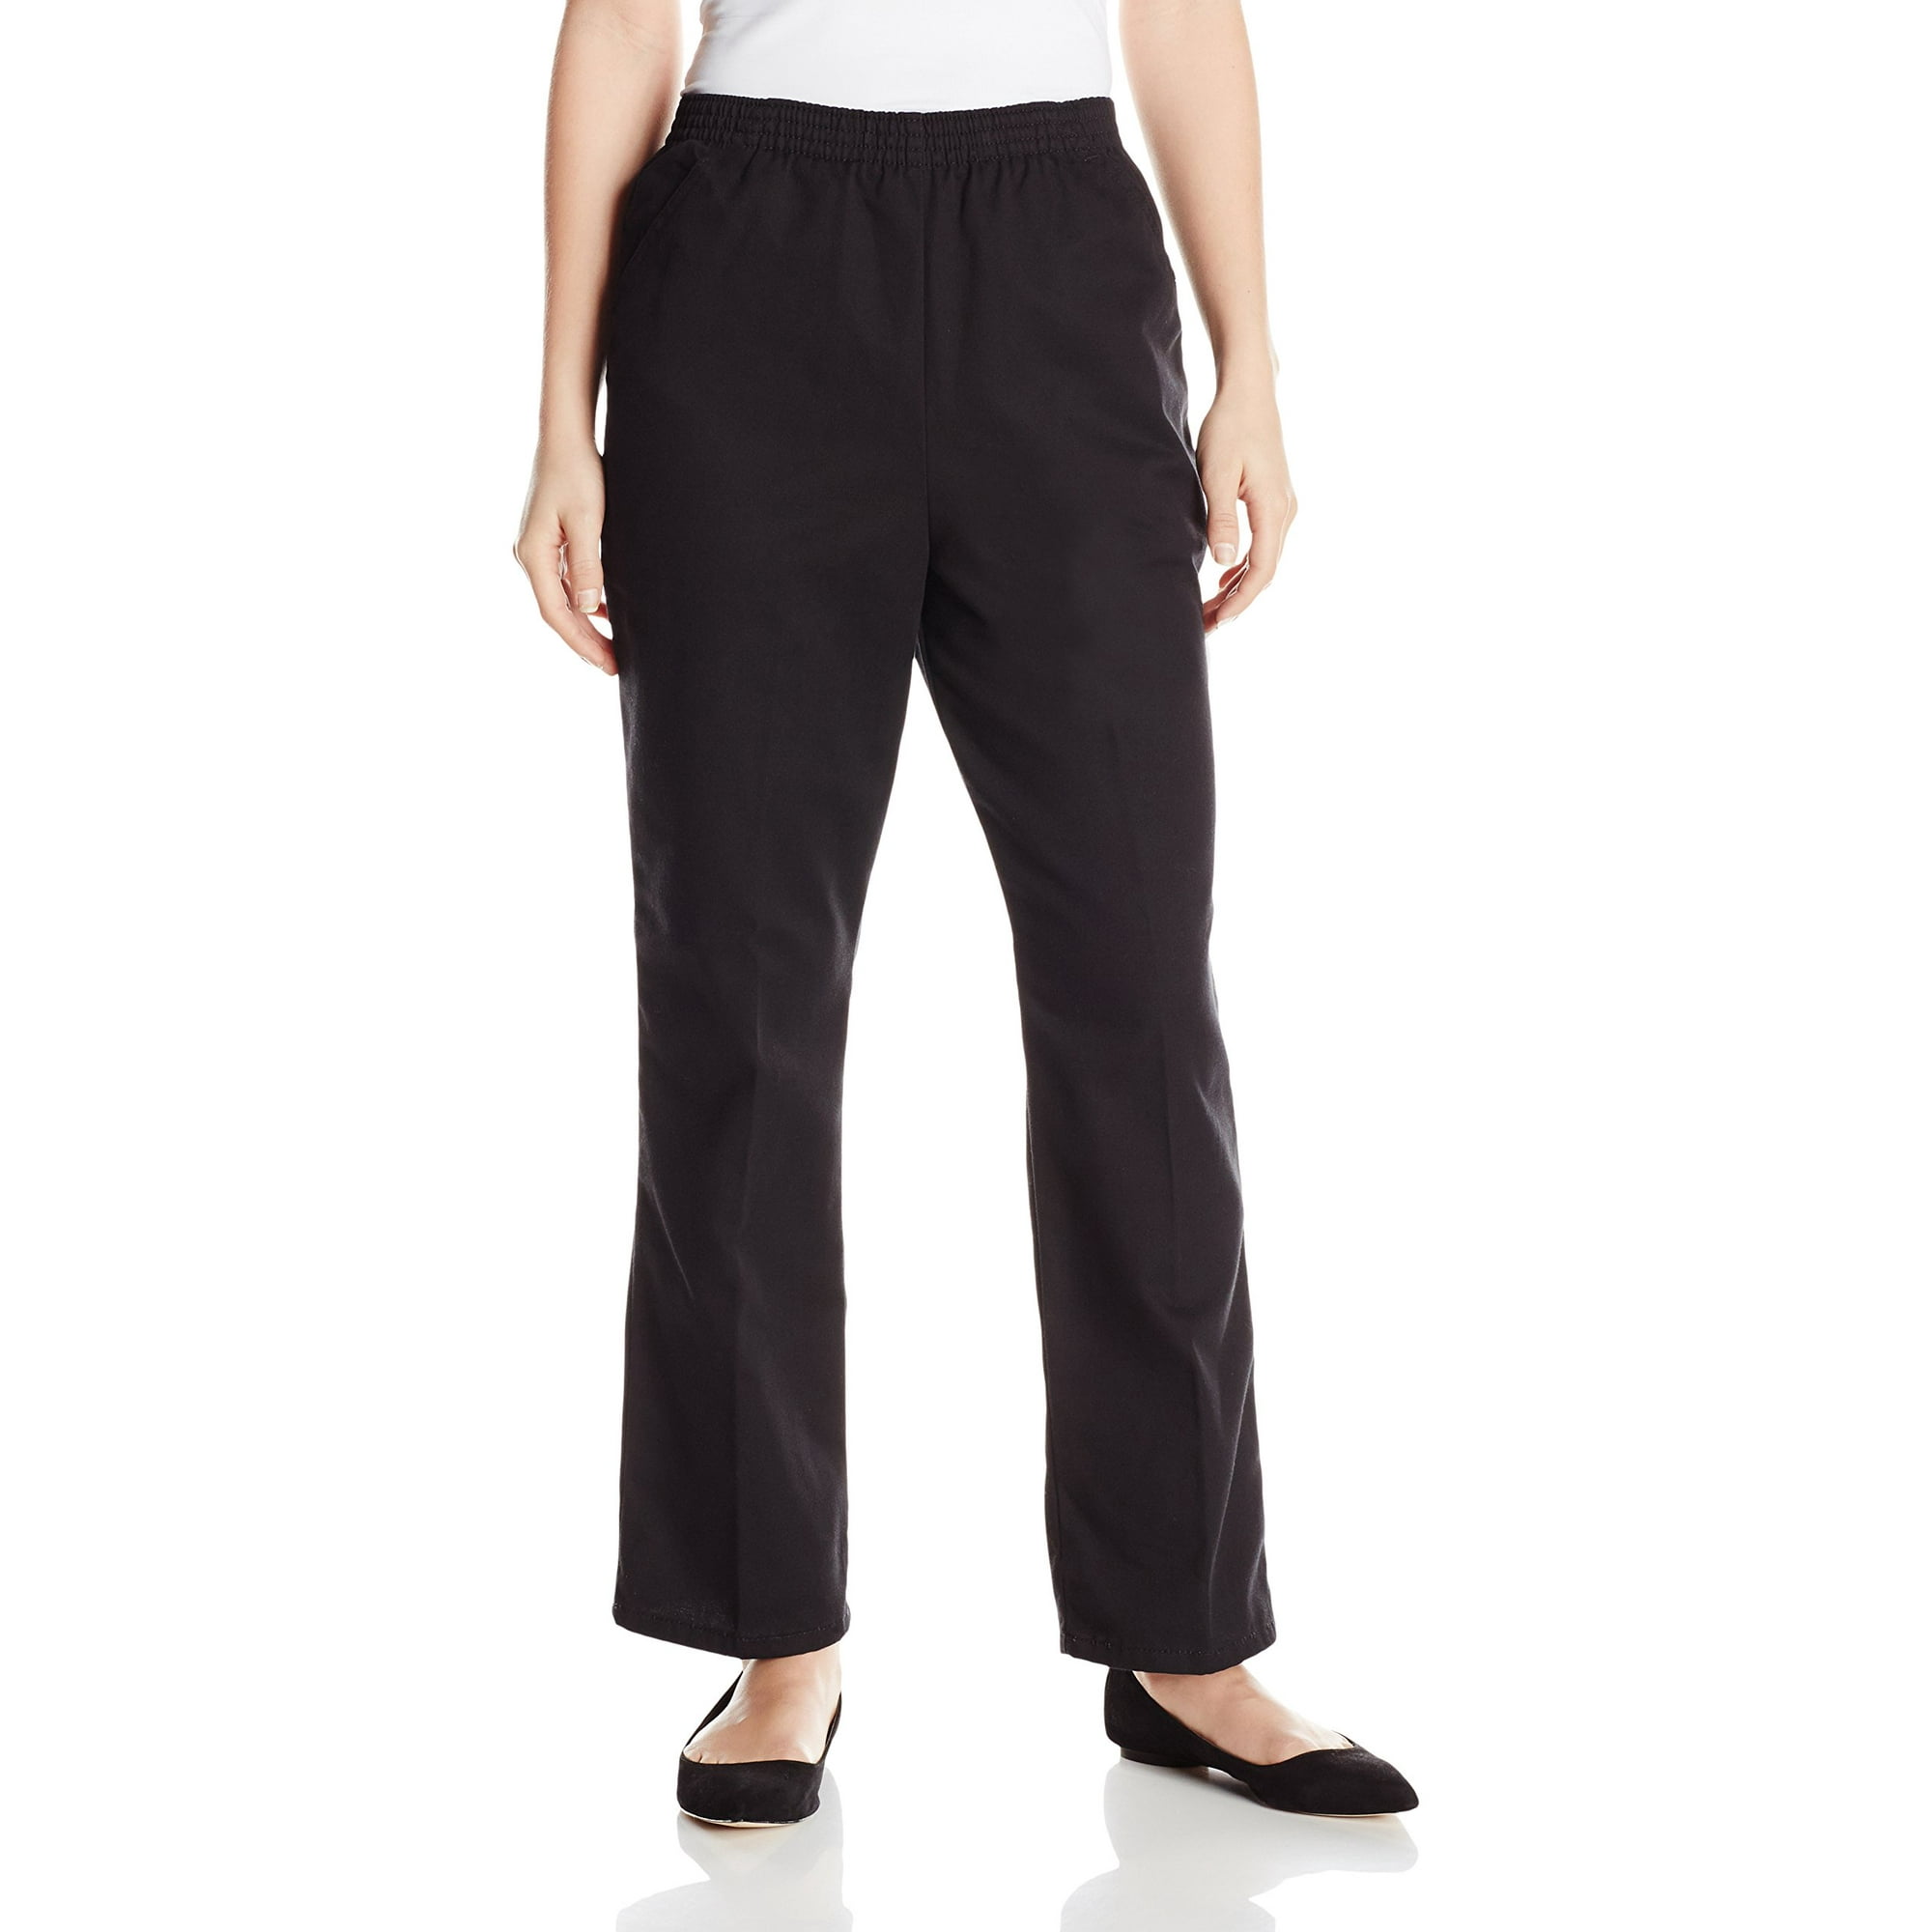 Chic Classic Collection Women's Cotton Pull-On Pant with Elastic